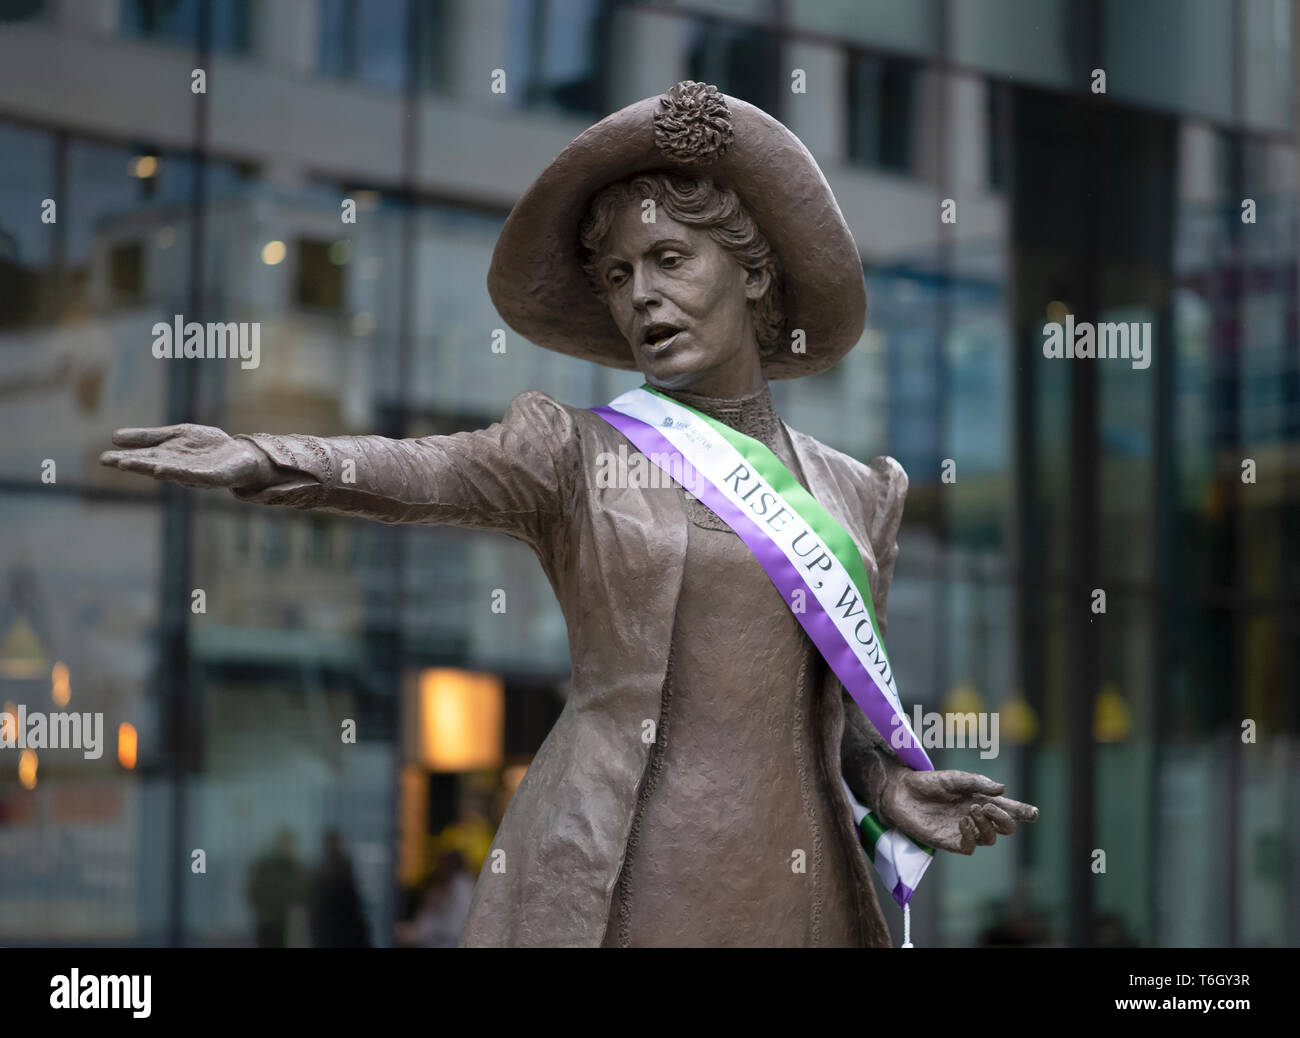 The Statue of suffragette Emmeline Pankhurst by sculptor Hazel Reeves. It stands in Saint Peters Square, Manchester, and was unveiled in Dec, 2018. Stock Photo